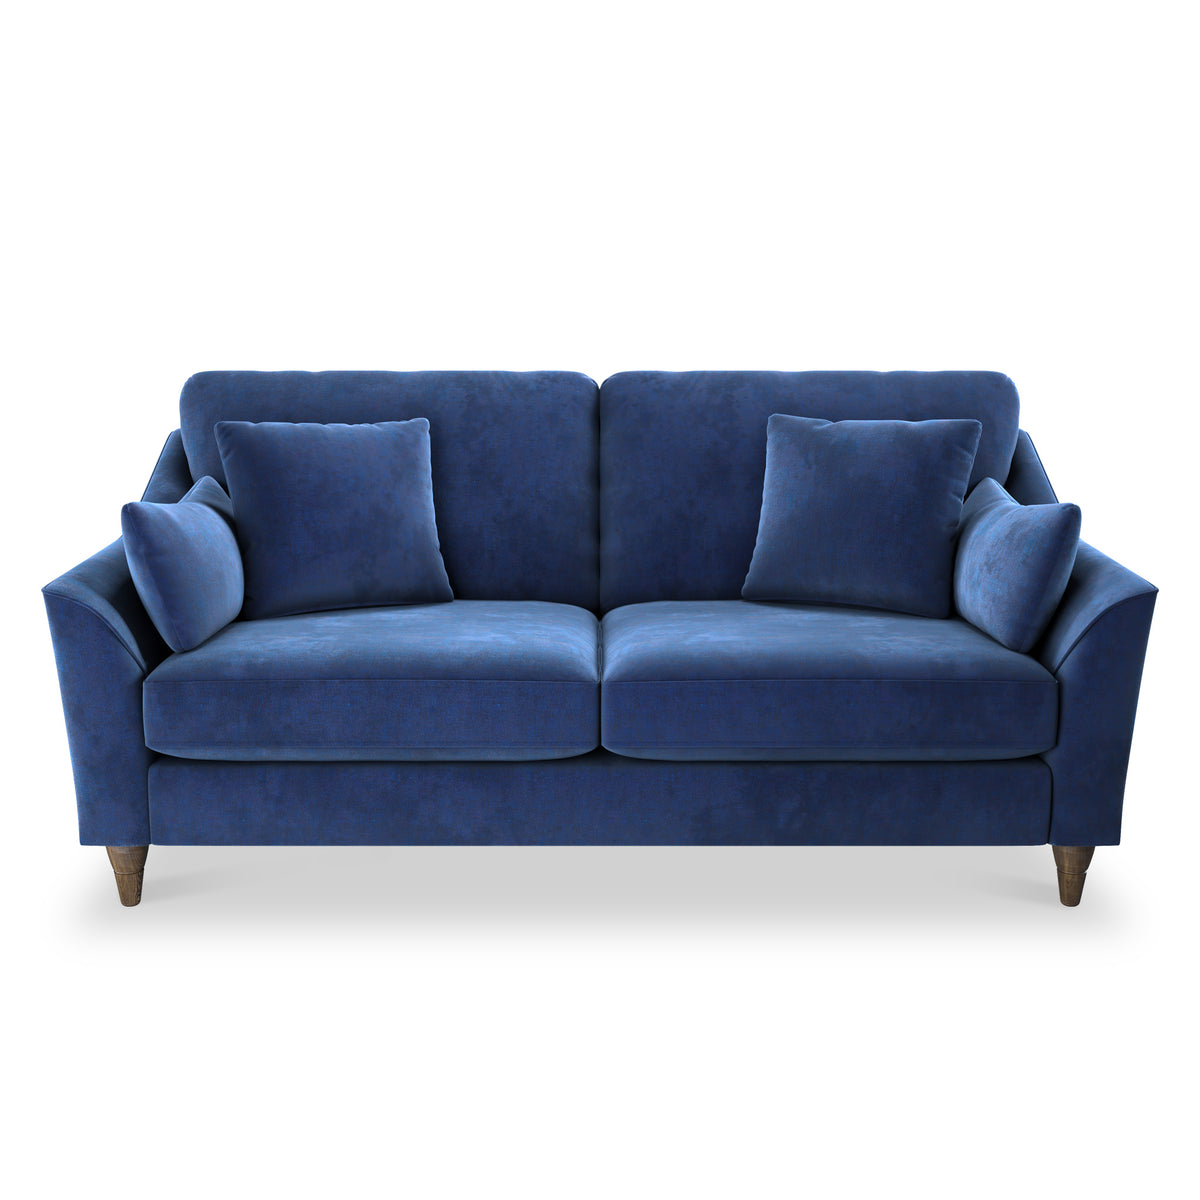 Charice Navy 2 Seater couch